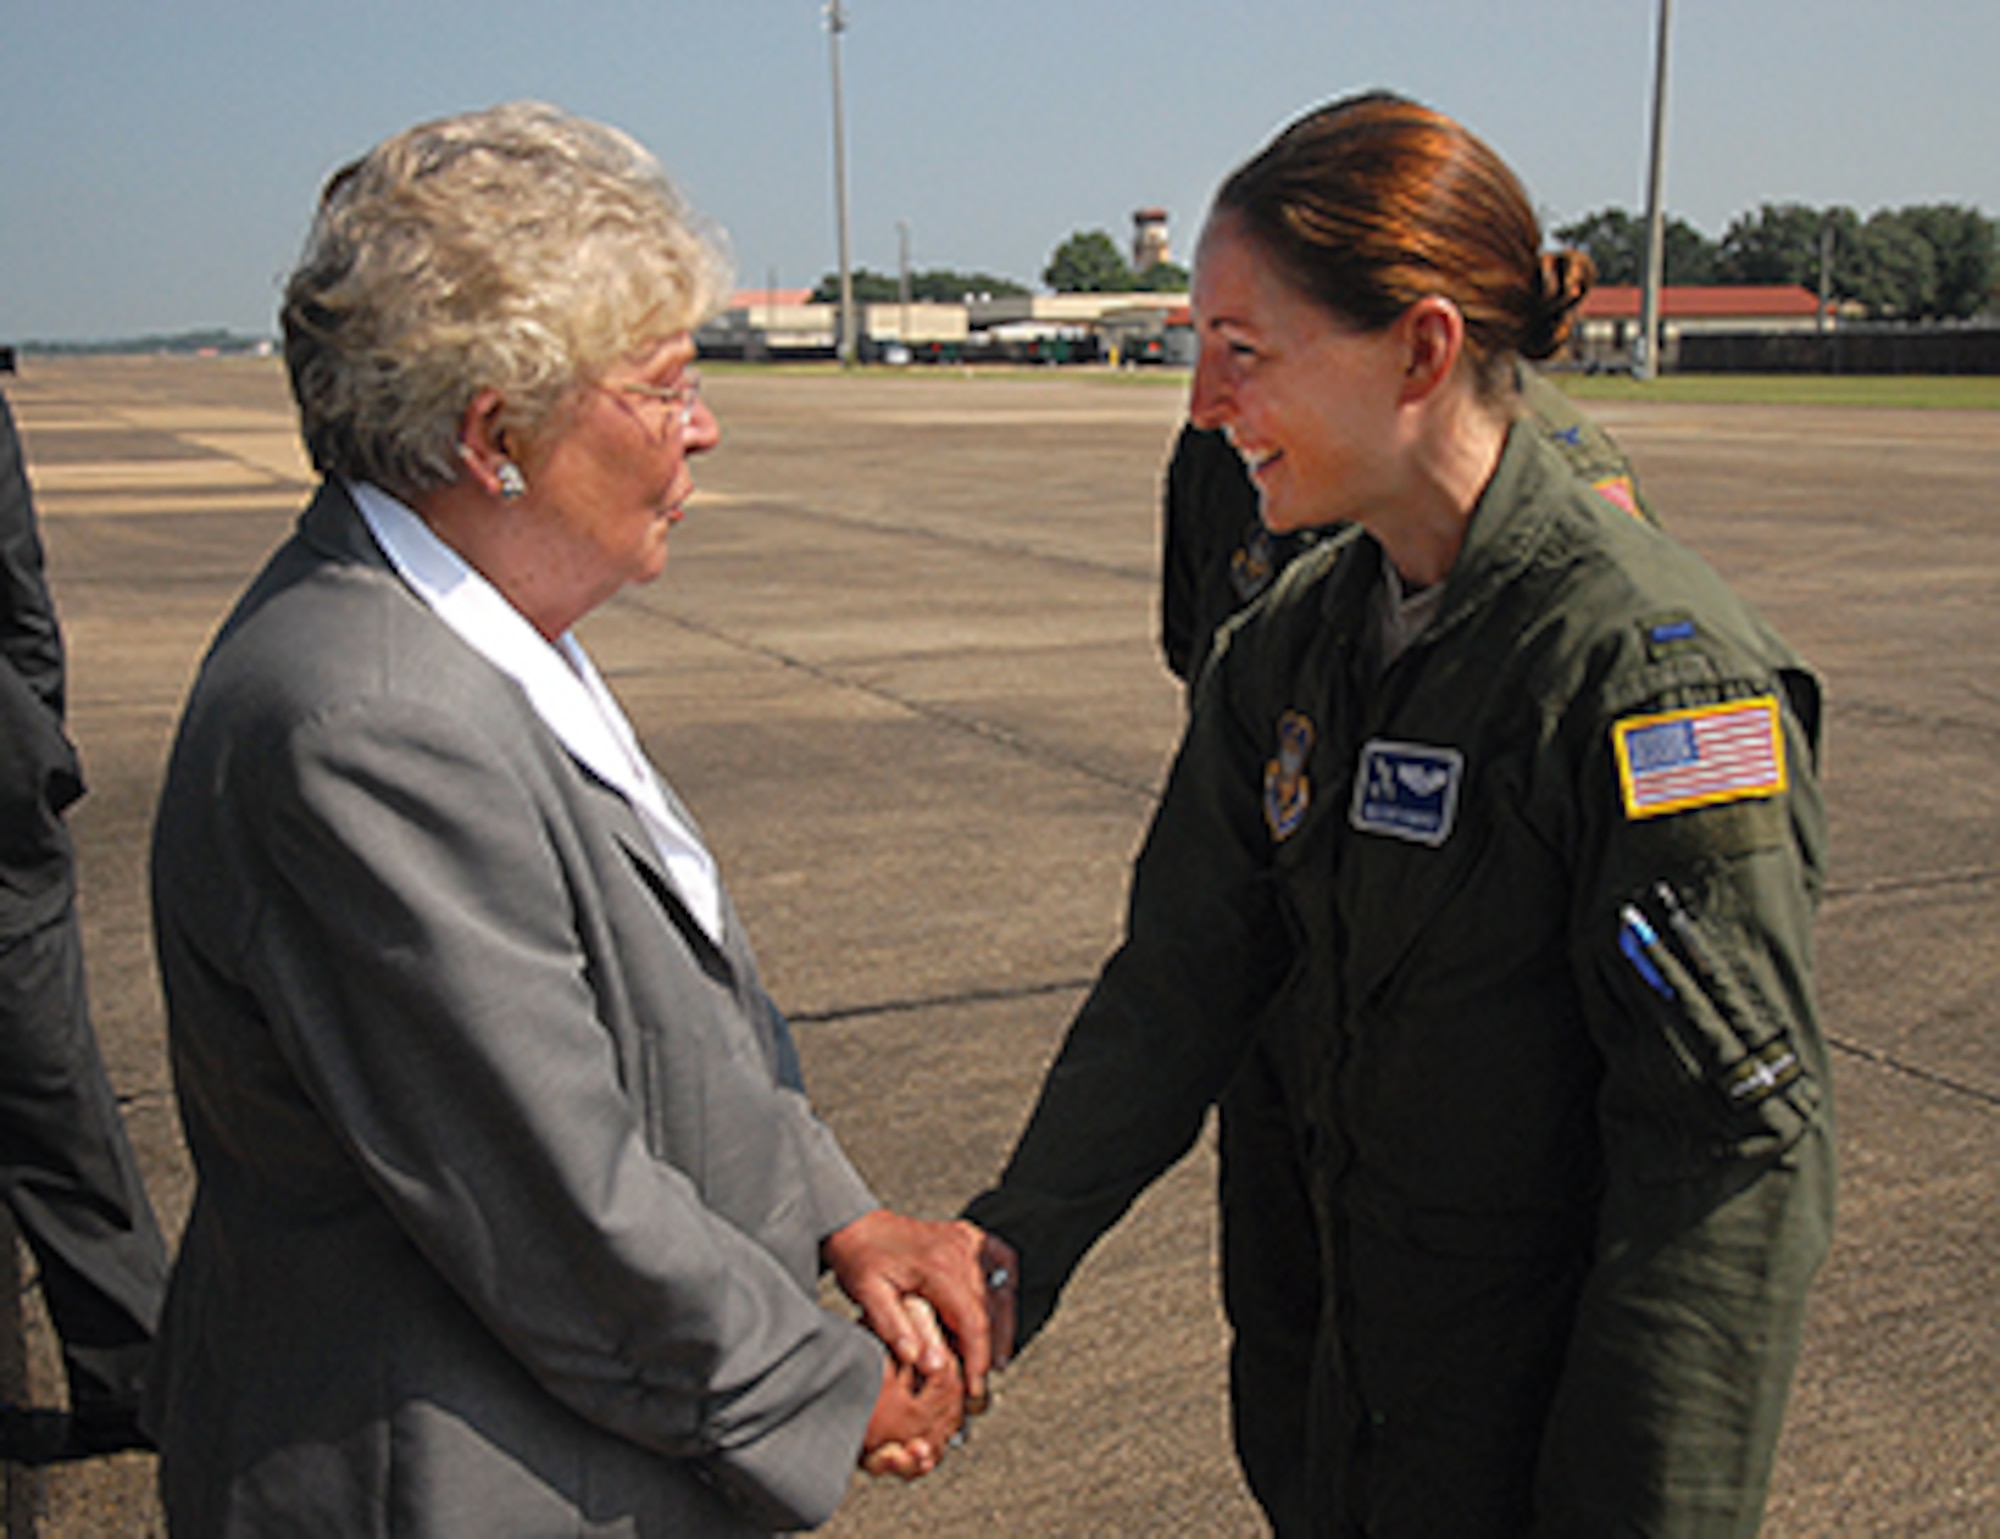 Alabama Lt. Gov. Kay Ivey meets with 1st Lt. Heather Kindred of the 357th Airlift Squadron during her C-130 tour. (Photo by Gene H. Hughes)